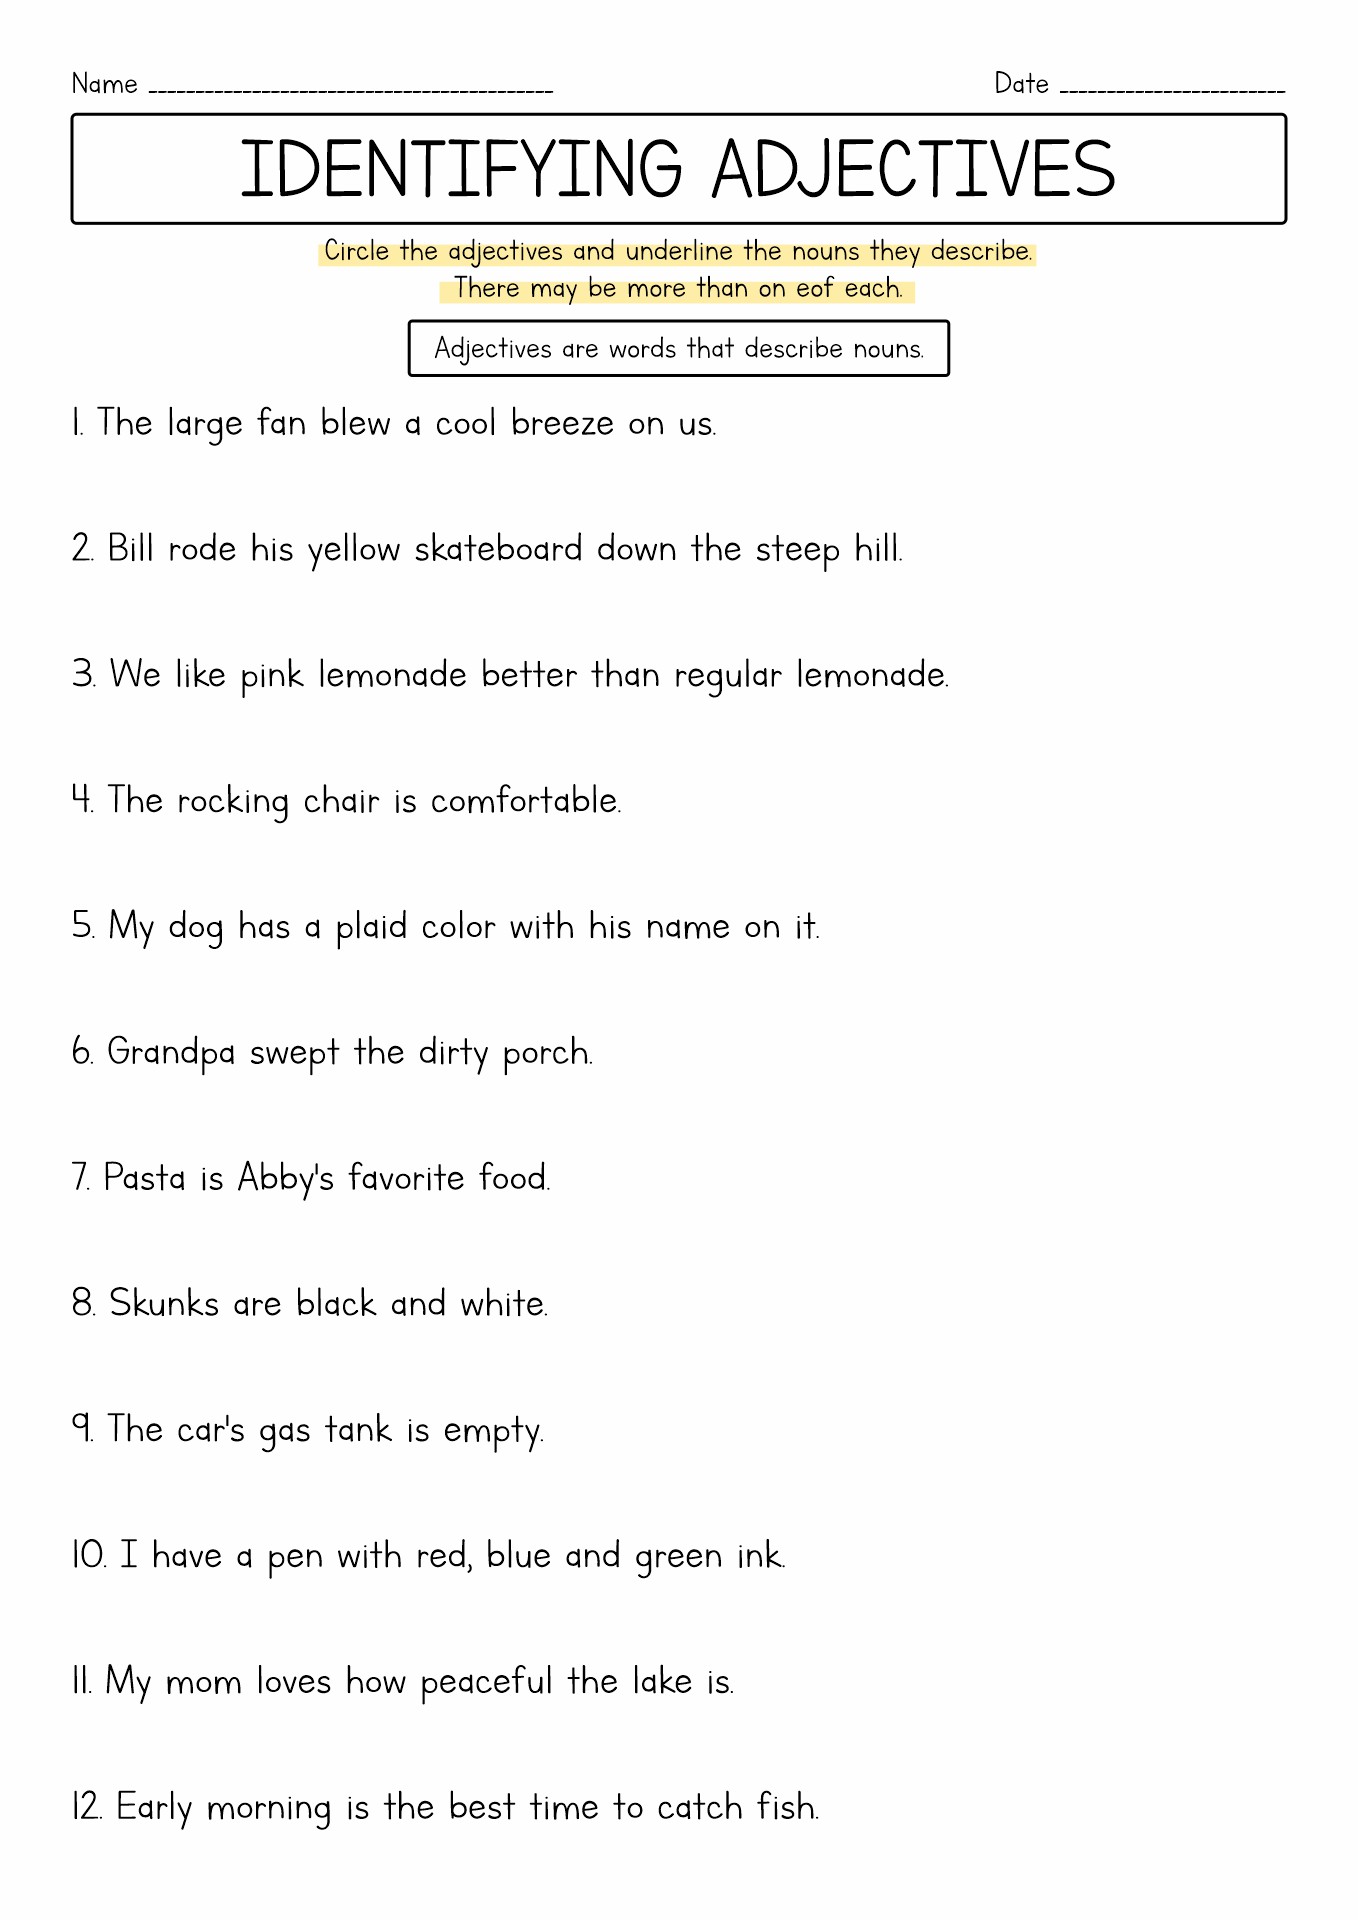 17-best-images-of-9th-grade-vocabulary-worksheets-9th-grade-spelling-words-worksheets